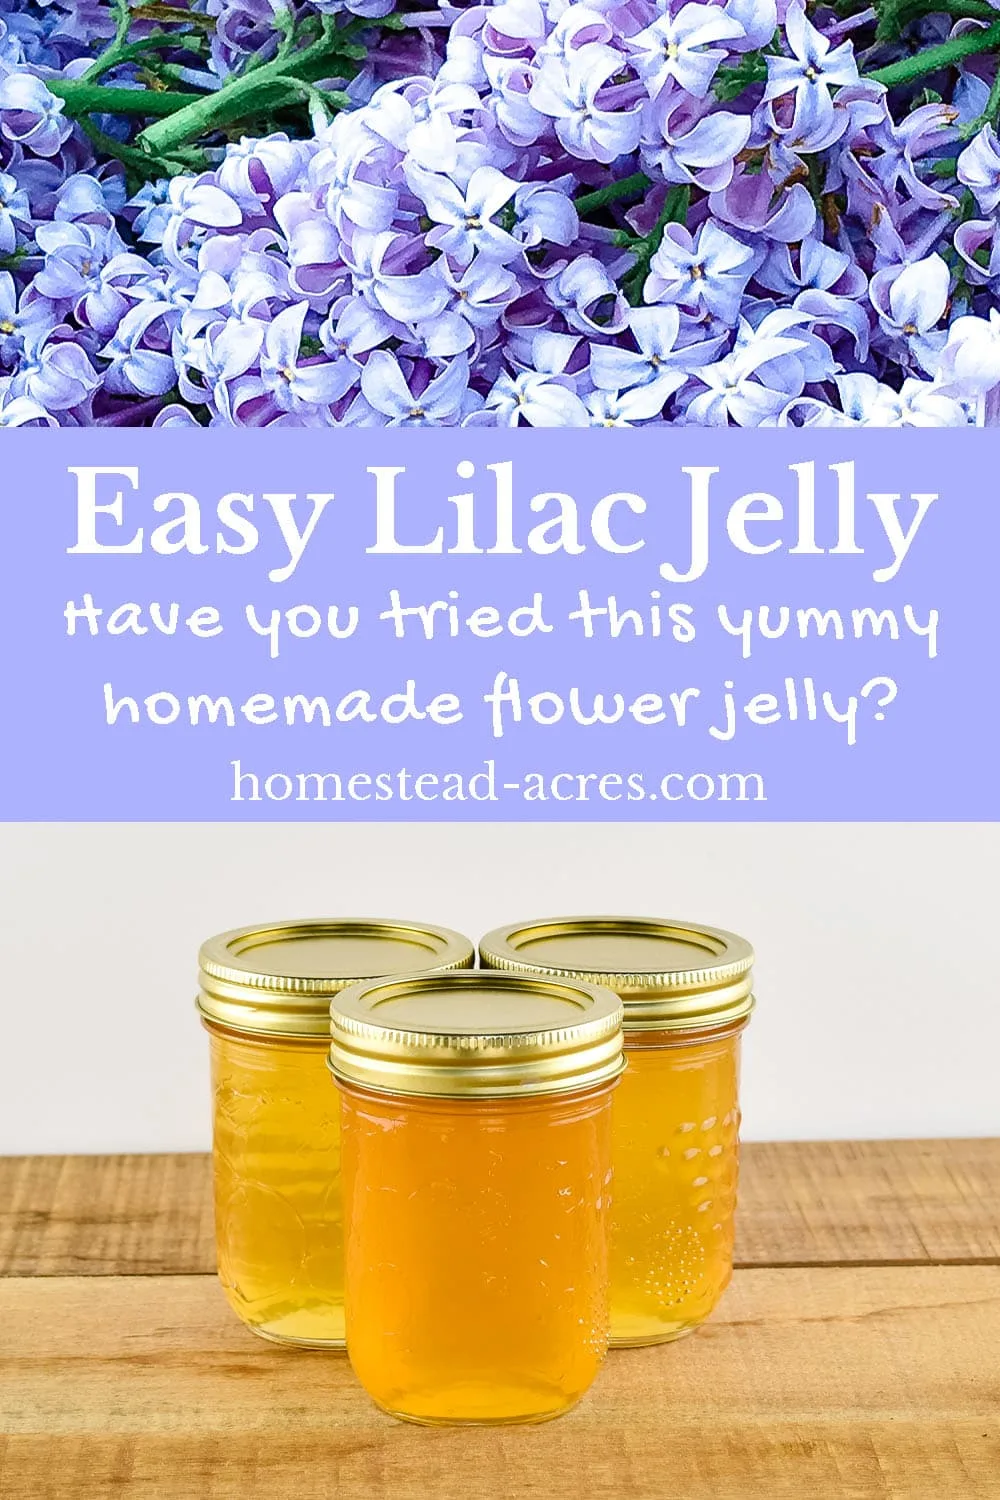 Easy lilac jelly. Have you tried this yummy homemade flower jelly? Text overlaid on top of a collage image of light purple lilac flowers and jars of jelly sitting on a wooden table.